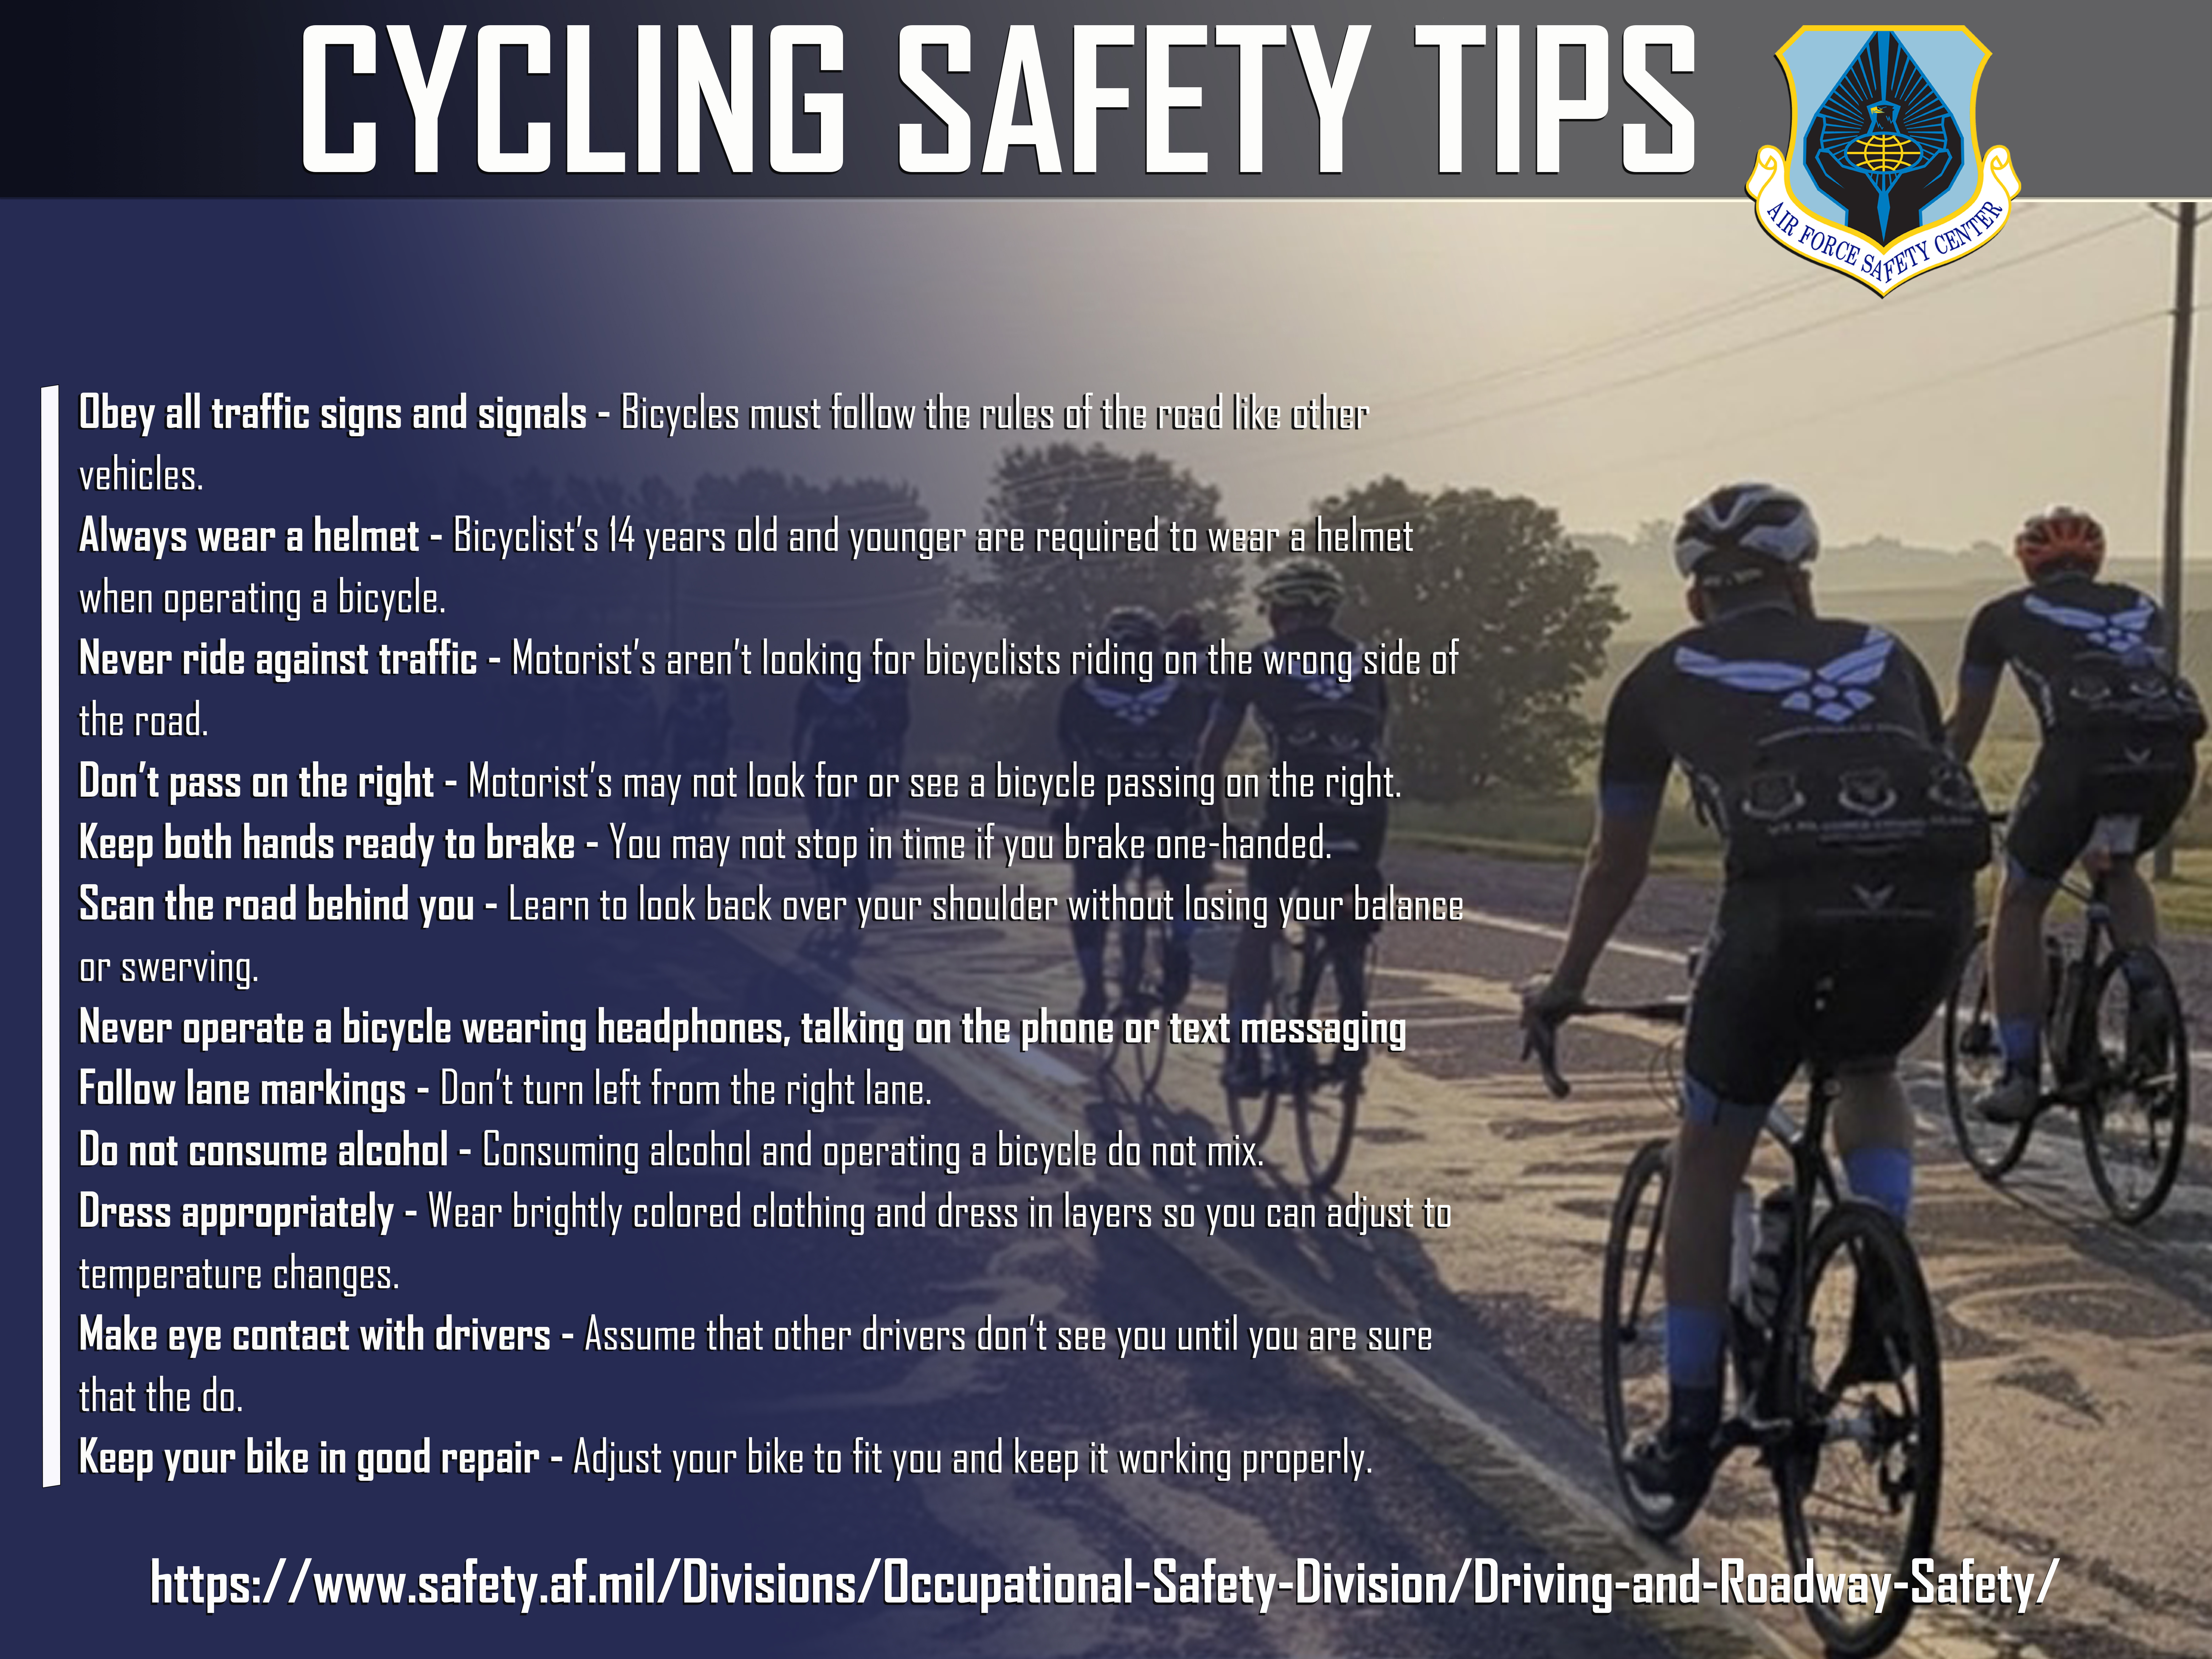 Cycling Safety Tips - group of cyclists wearing Air Force gear